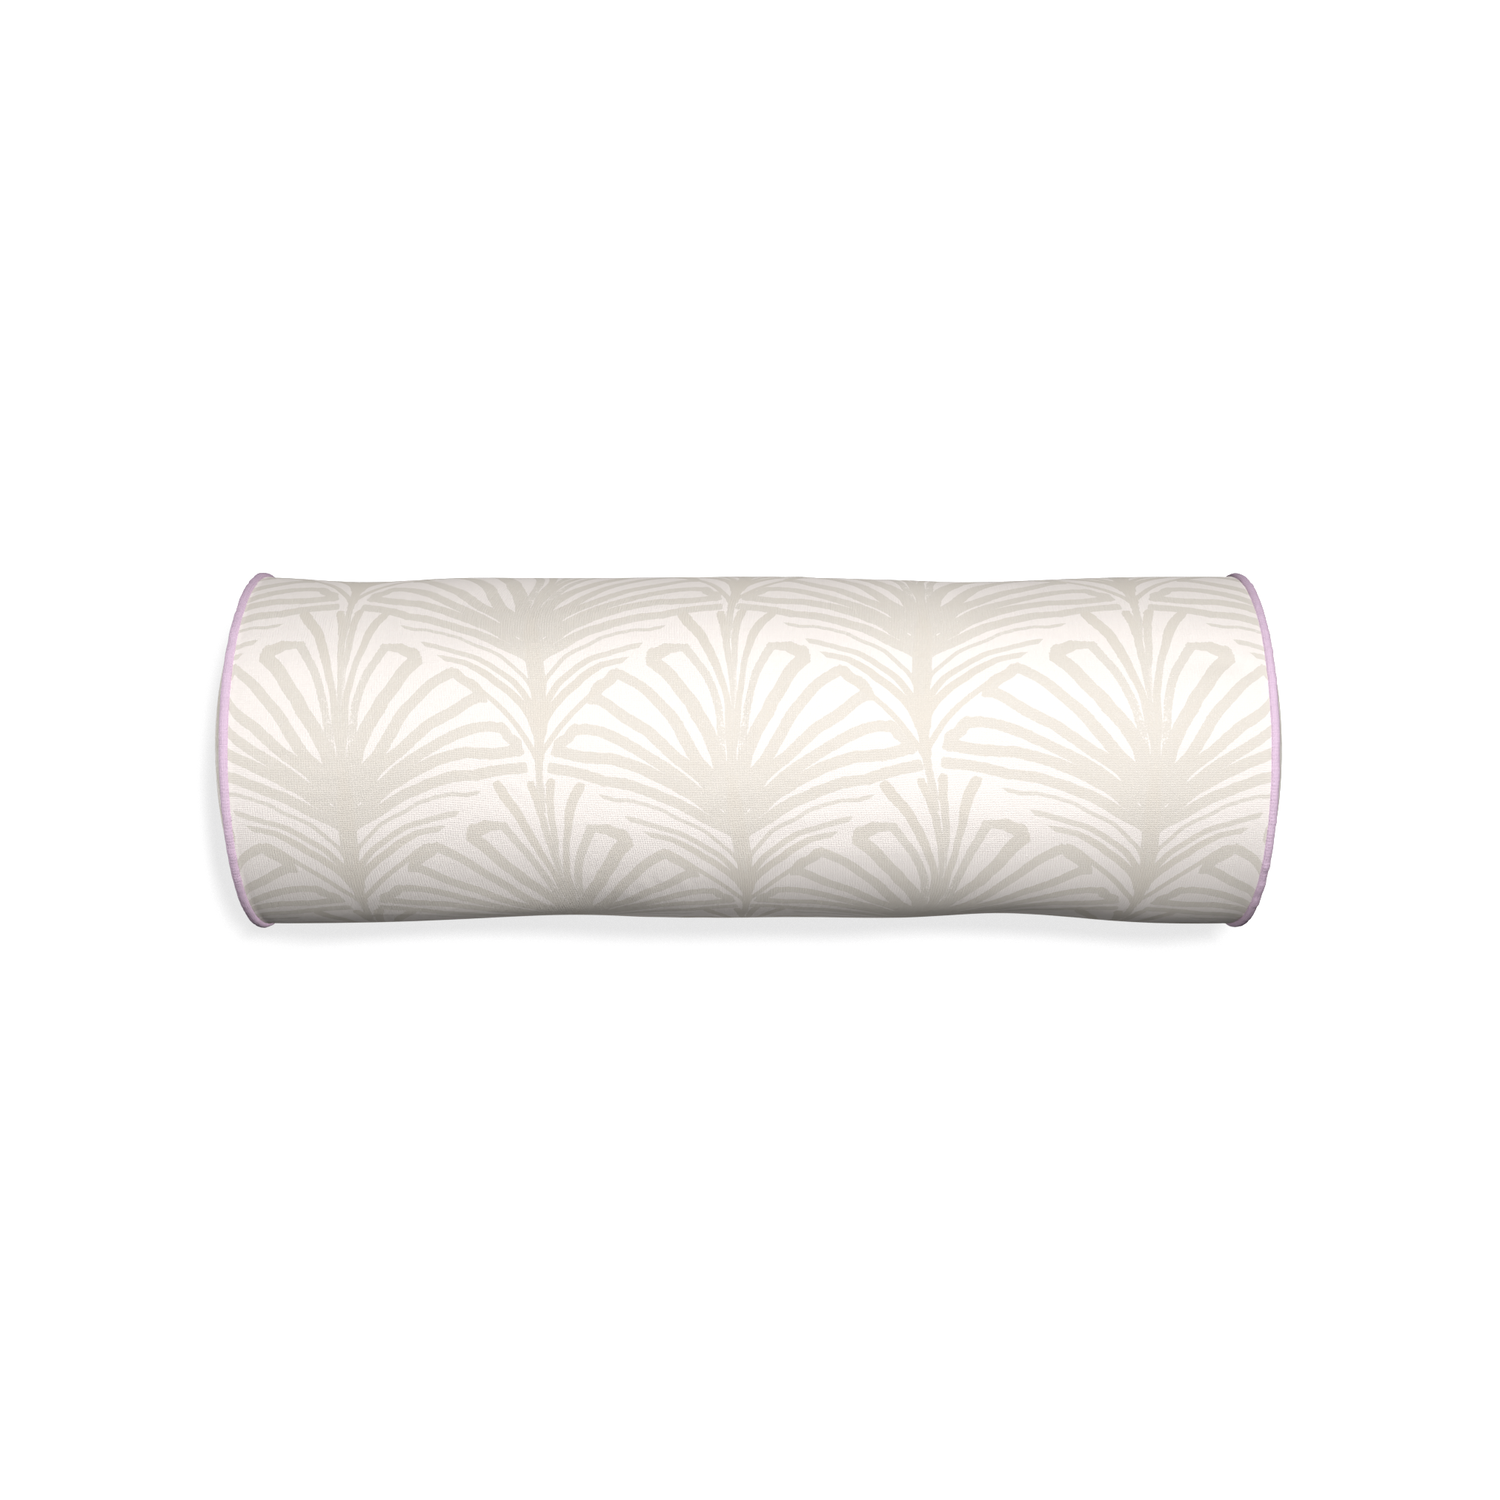 Bolster suzy sand custom pillow with l piping on white background